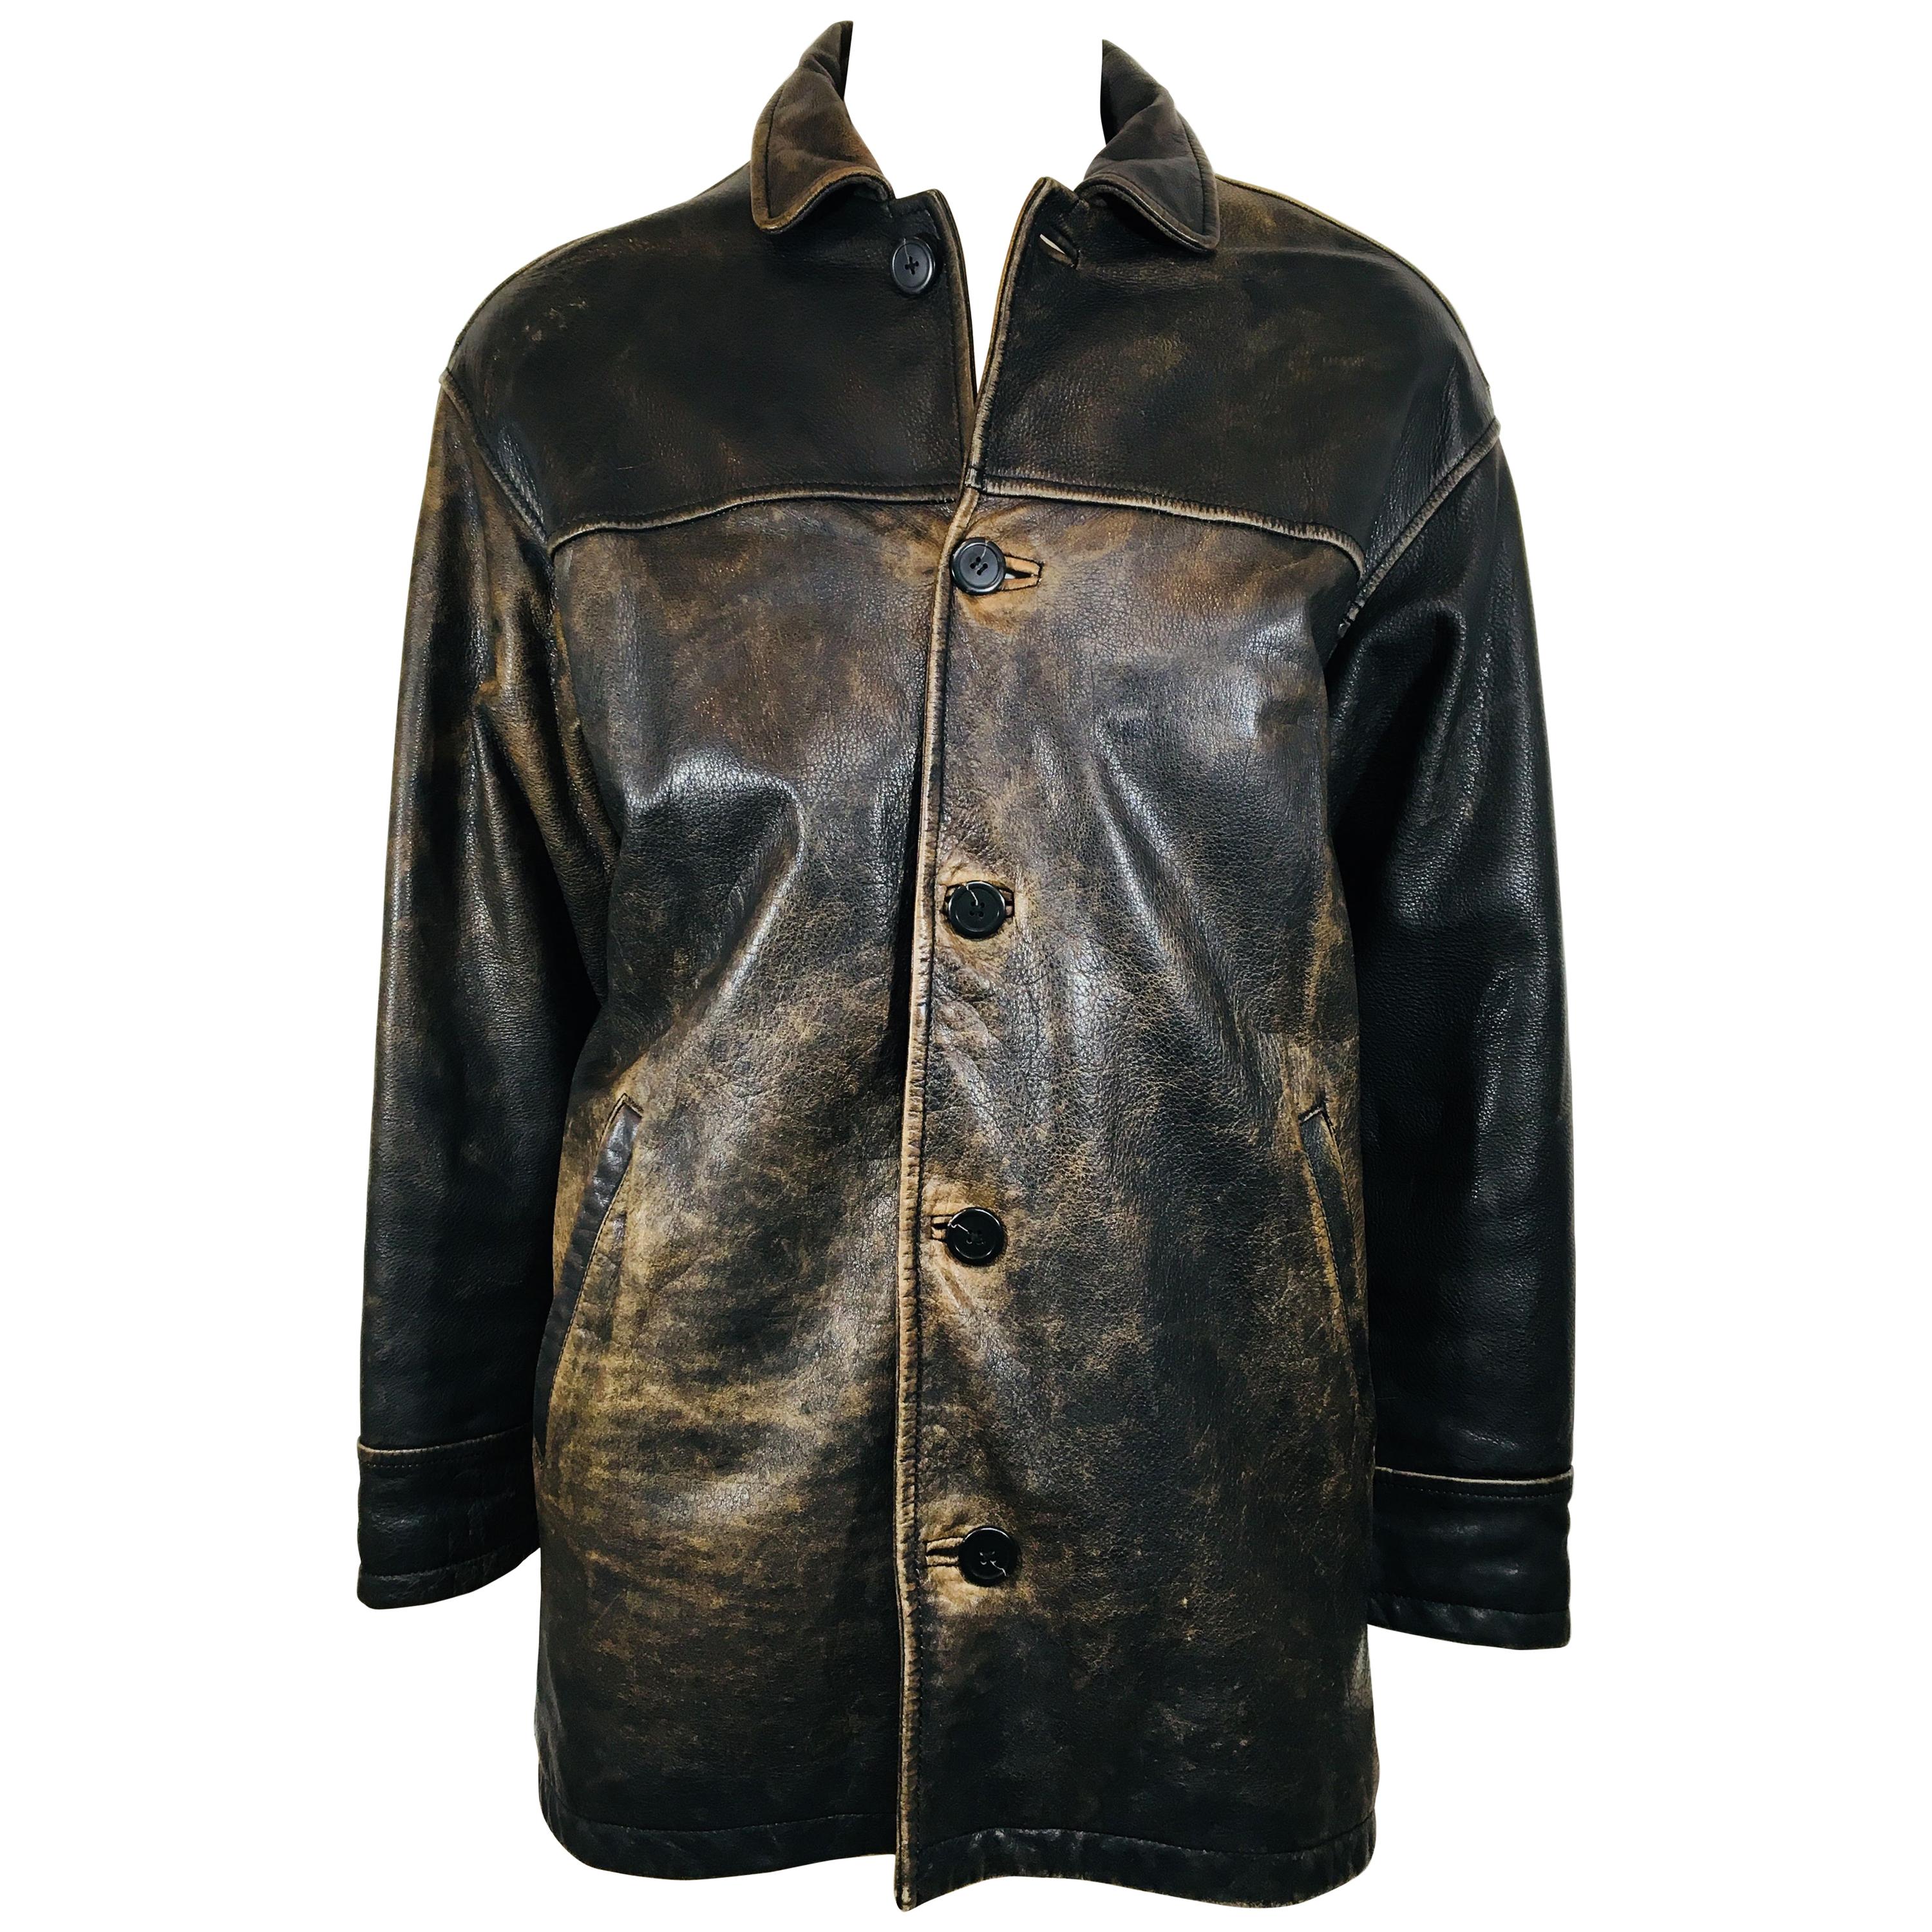 Men's Andrew Marc Faded Brown Leather jacket.